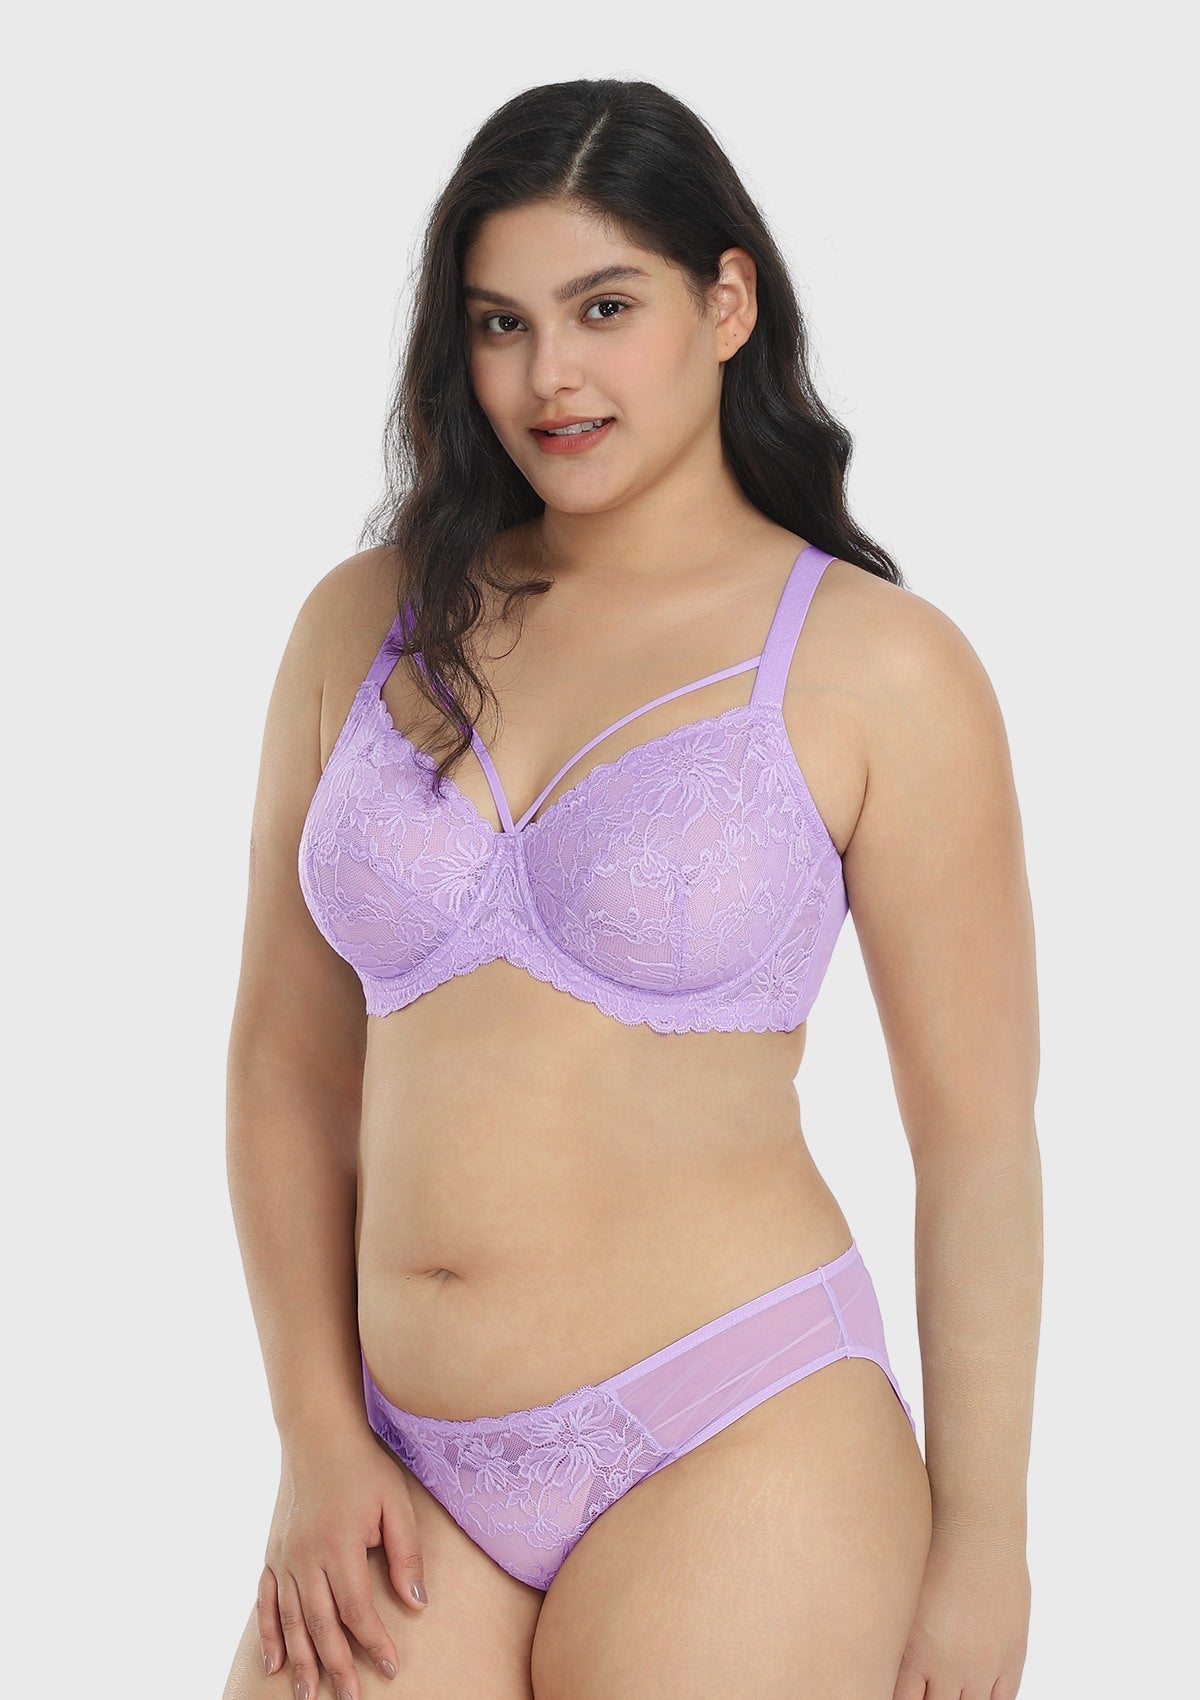 HSIA Pretty In Petals See-Through Lace Bra: Lift And Separate - Purple / 40 / D